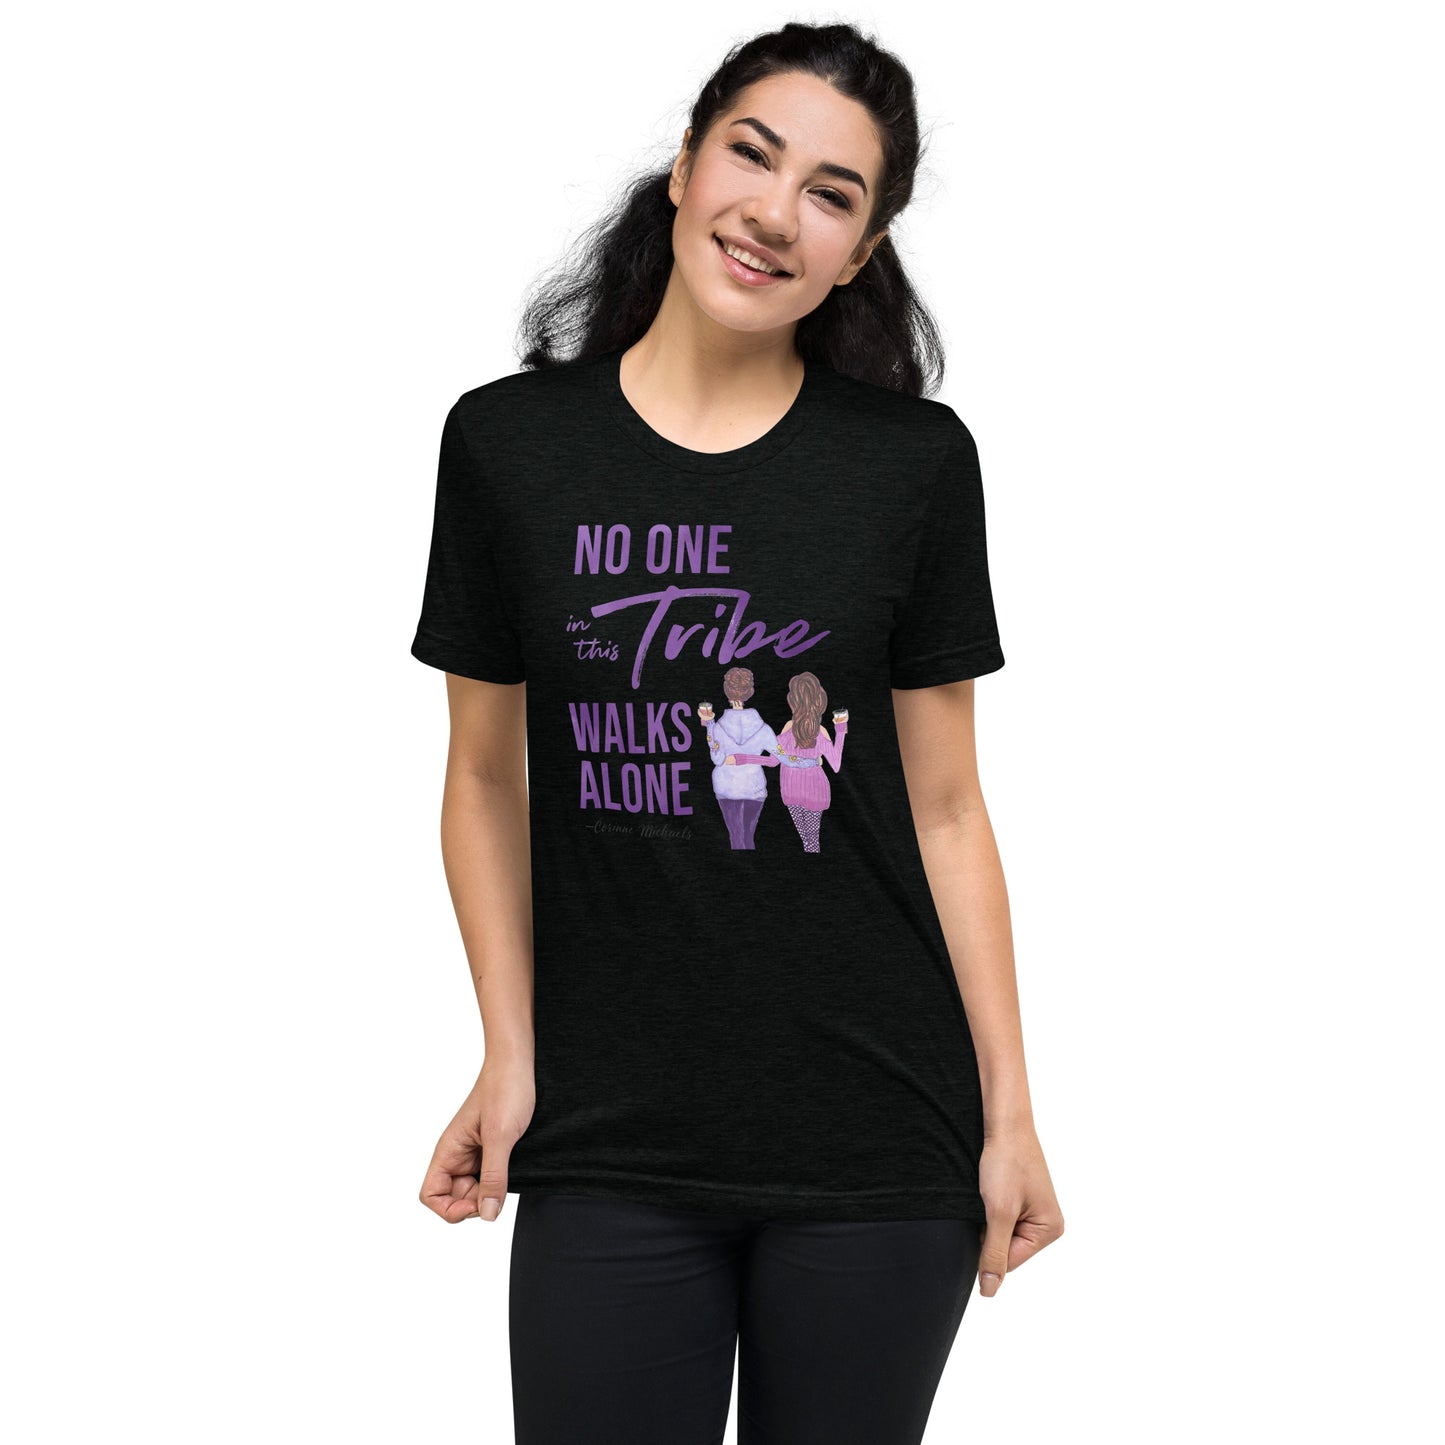 No One in this Tribe Walks Alone - T-shirt